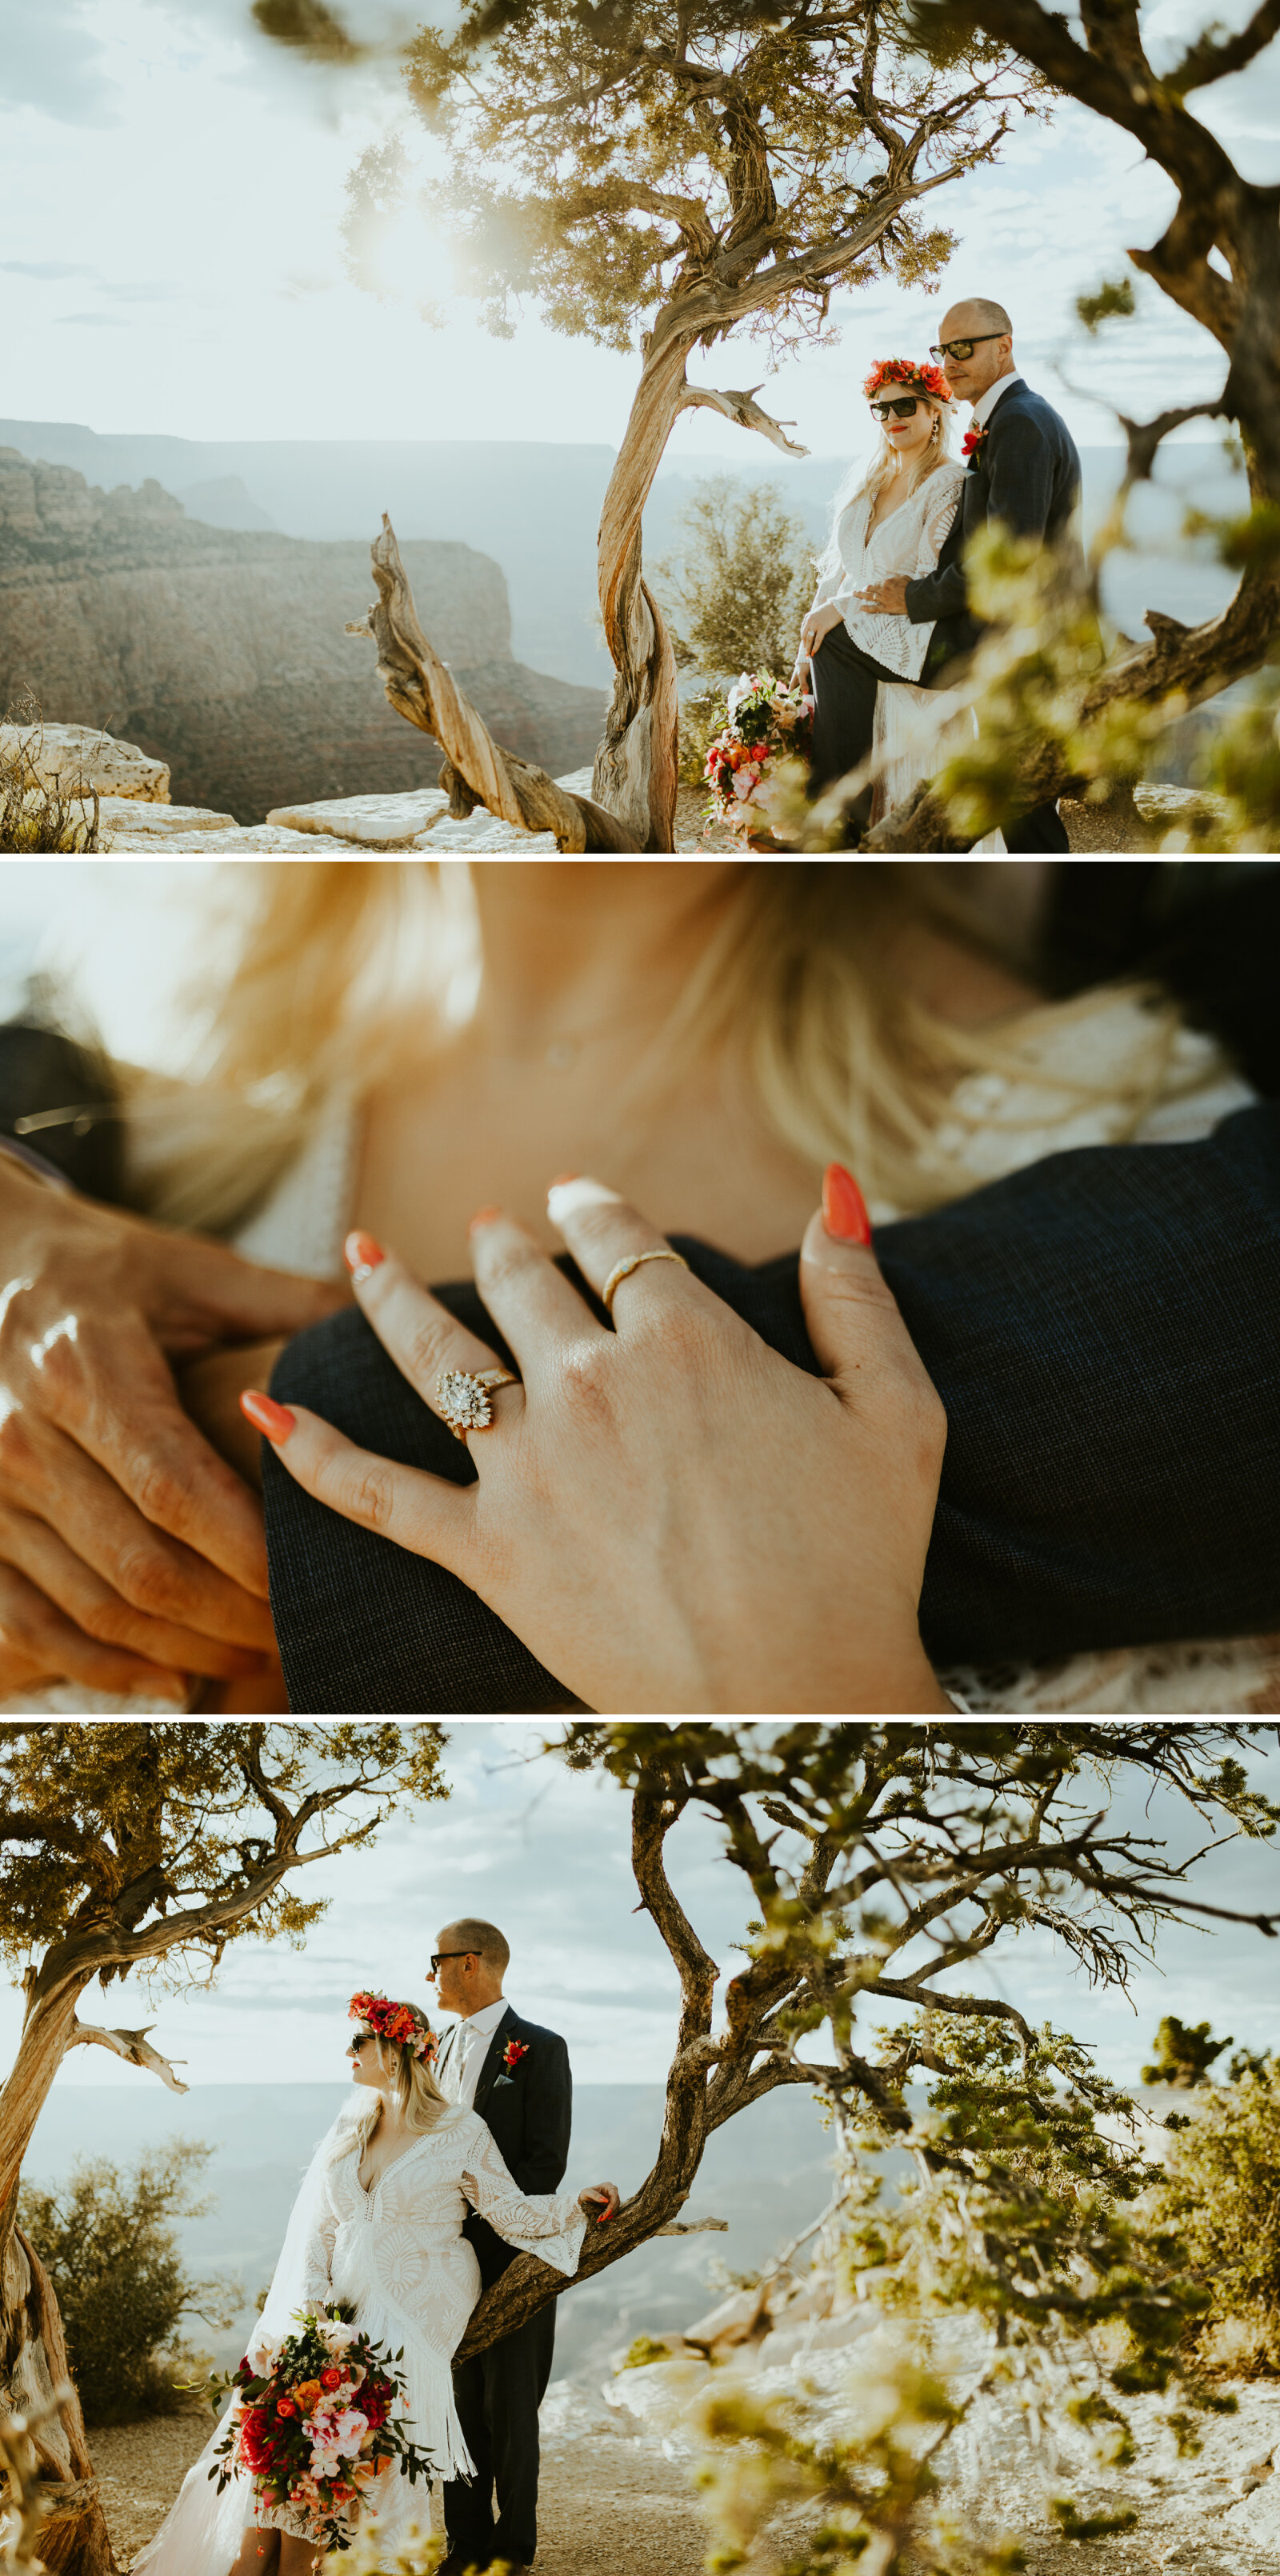 moran point grand canyon national park arizona elopement photography bibiluxe dress with fringe tassels boho bride inspiration boho wedding style inspo bride and groom with sunglasses tom for sunglasses heidi gibson engagement ring bridal bouquet.jpg